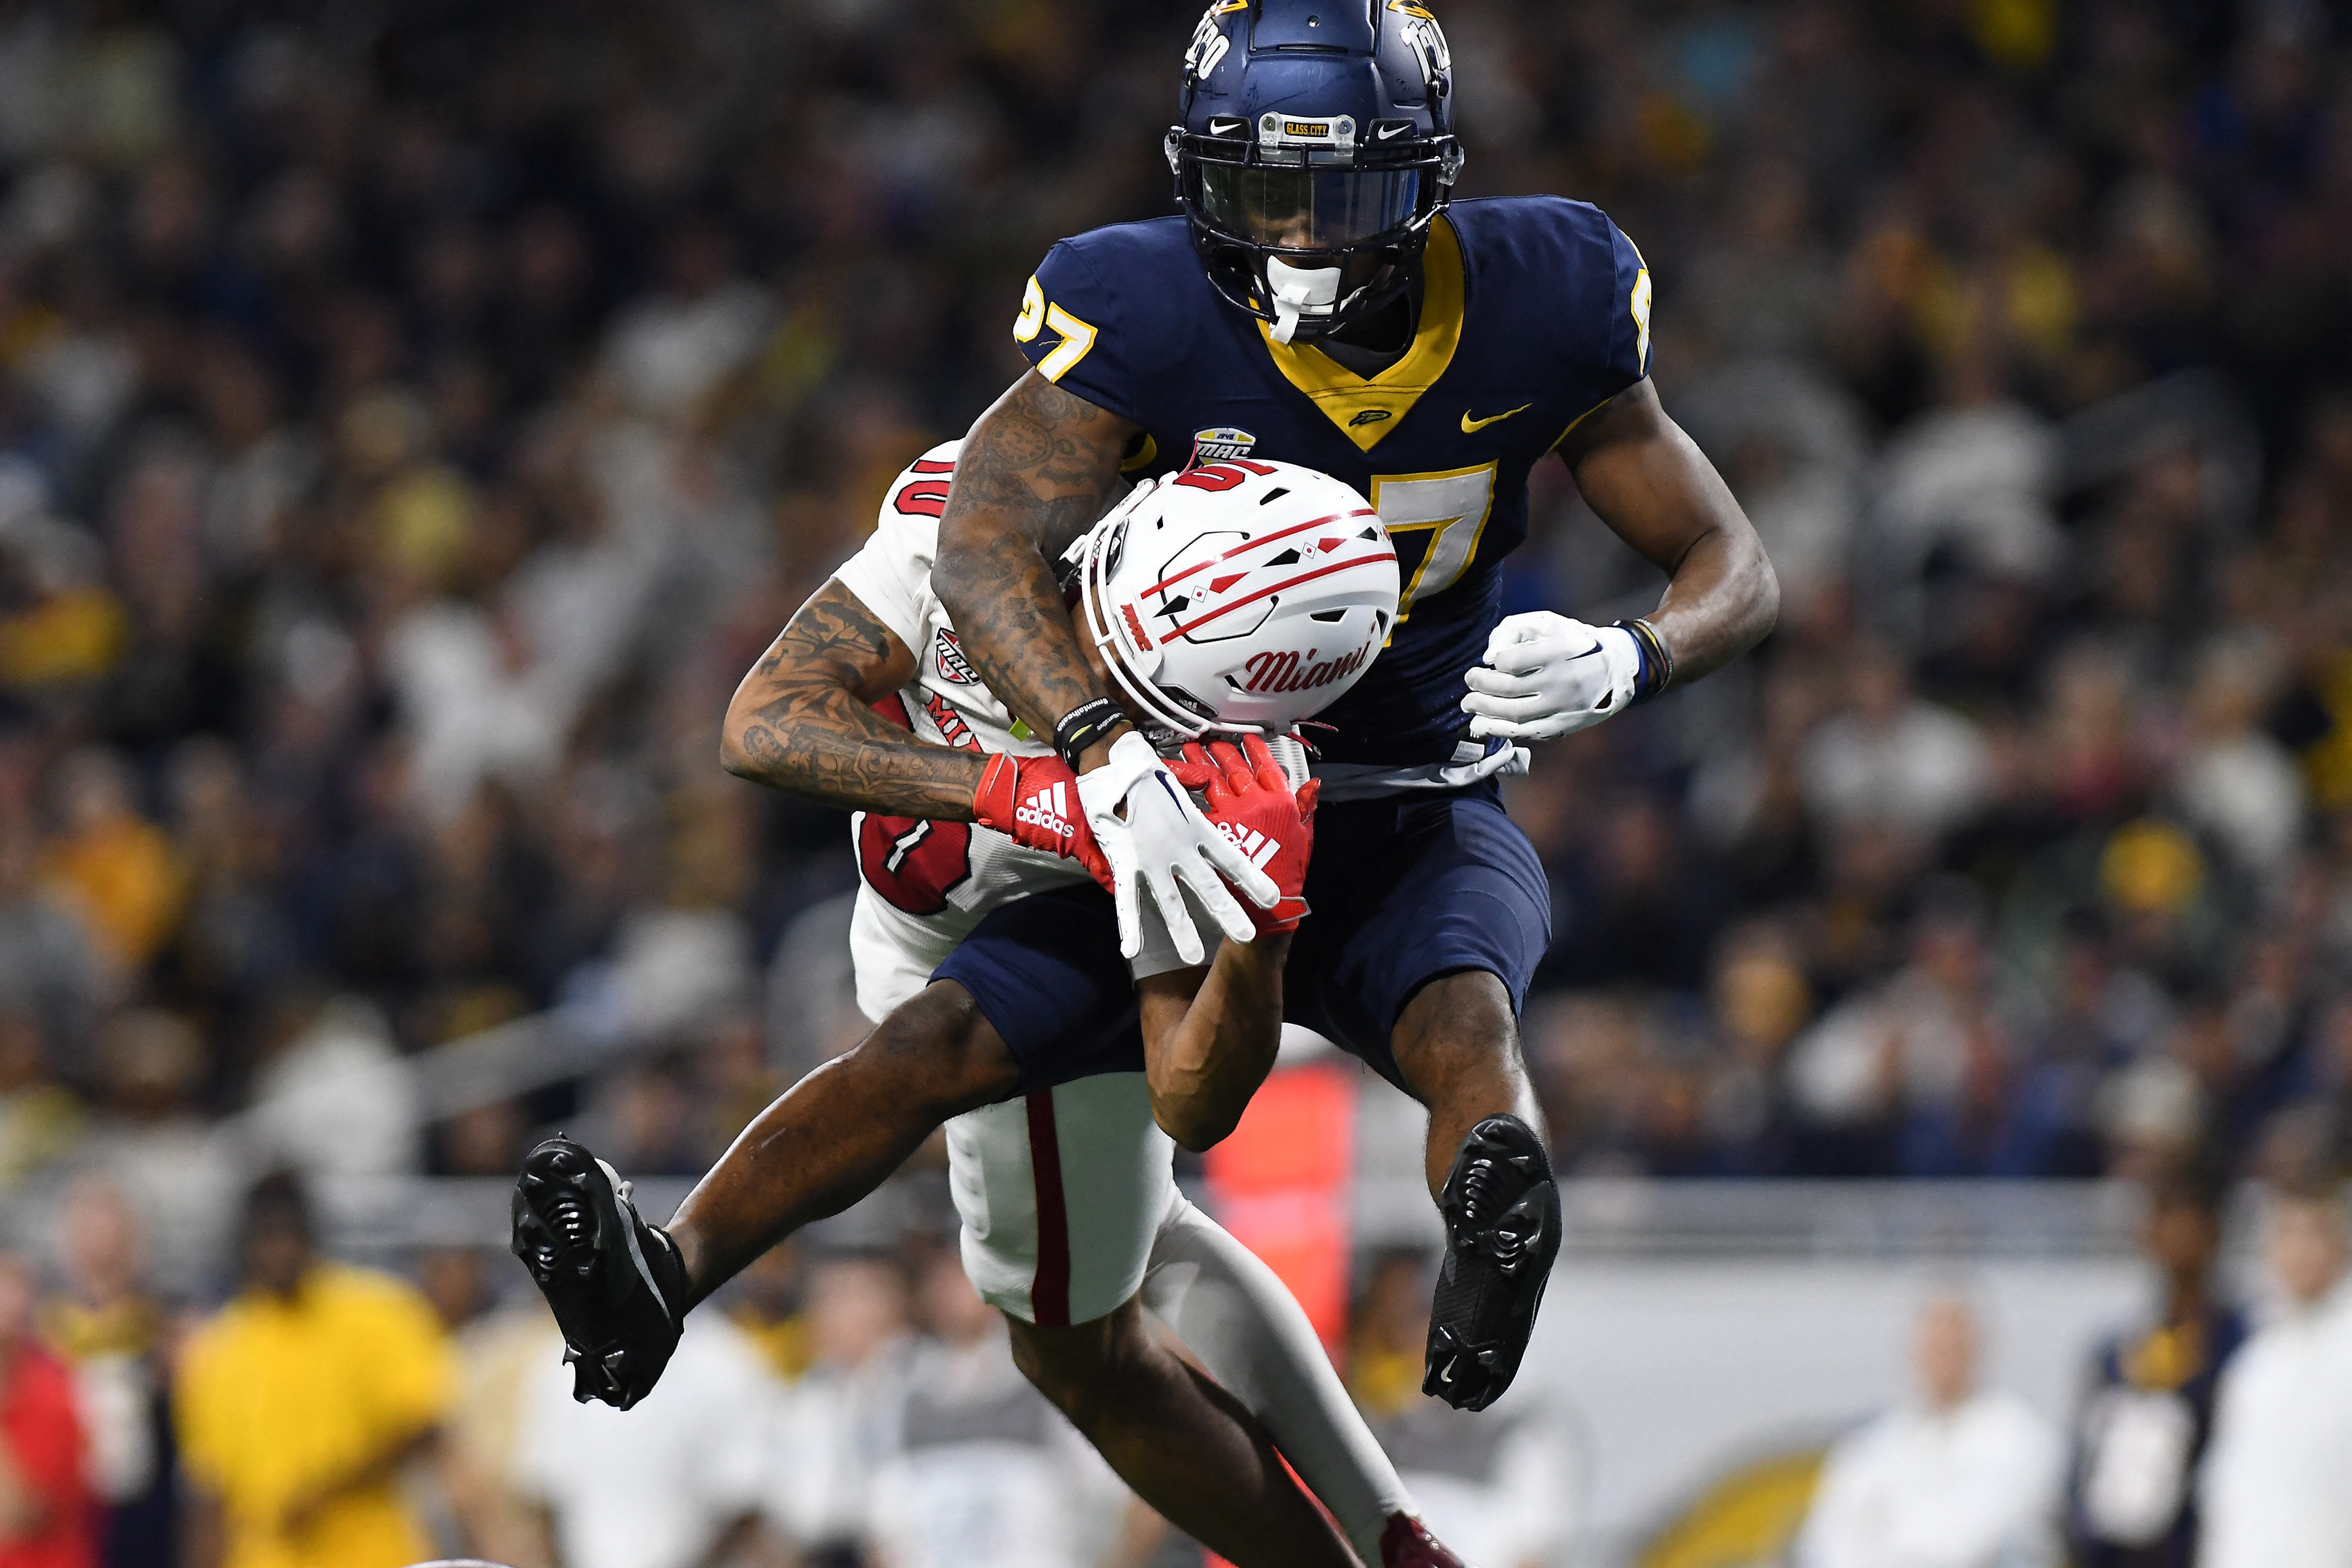 Cue CB1: Toledo's Quinyon Mitchell 'can hang with big dawgs' | Reuters